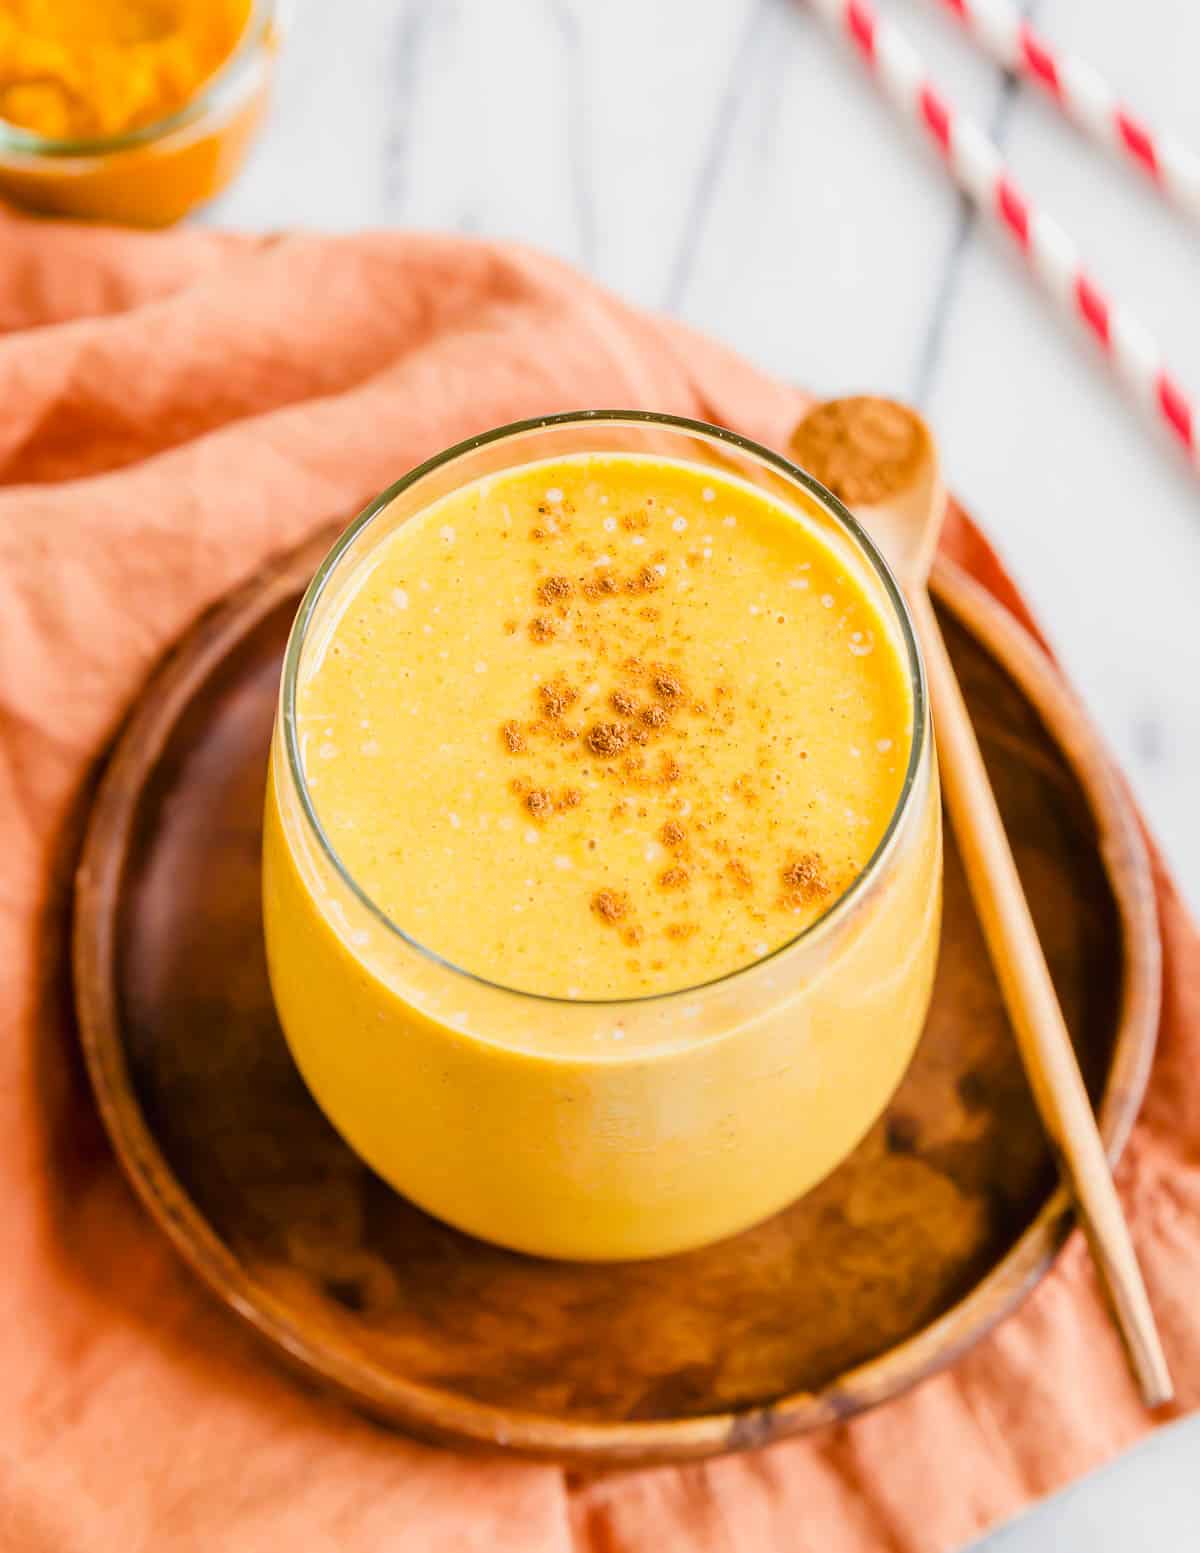 Creamy pumpkin banana smoothie with cinnamon in a glass on a wooden plate.